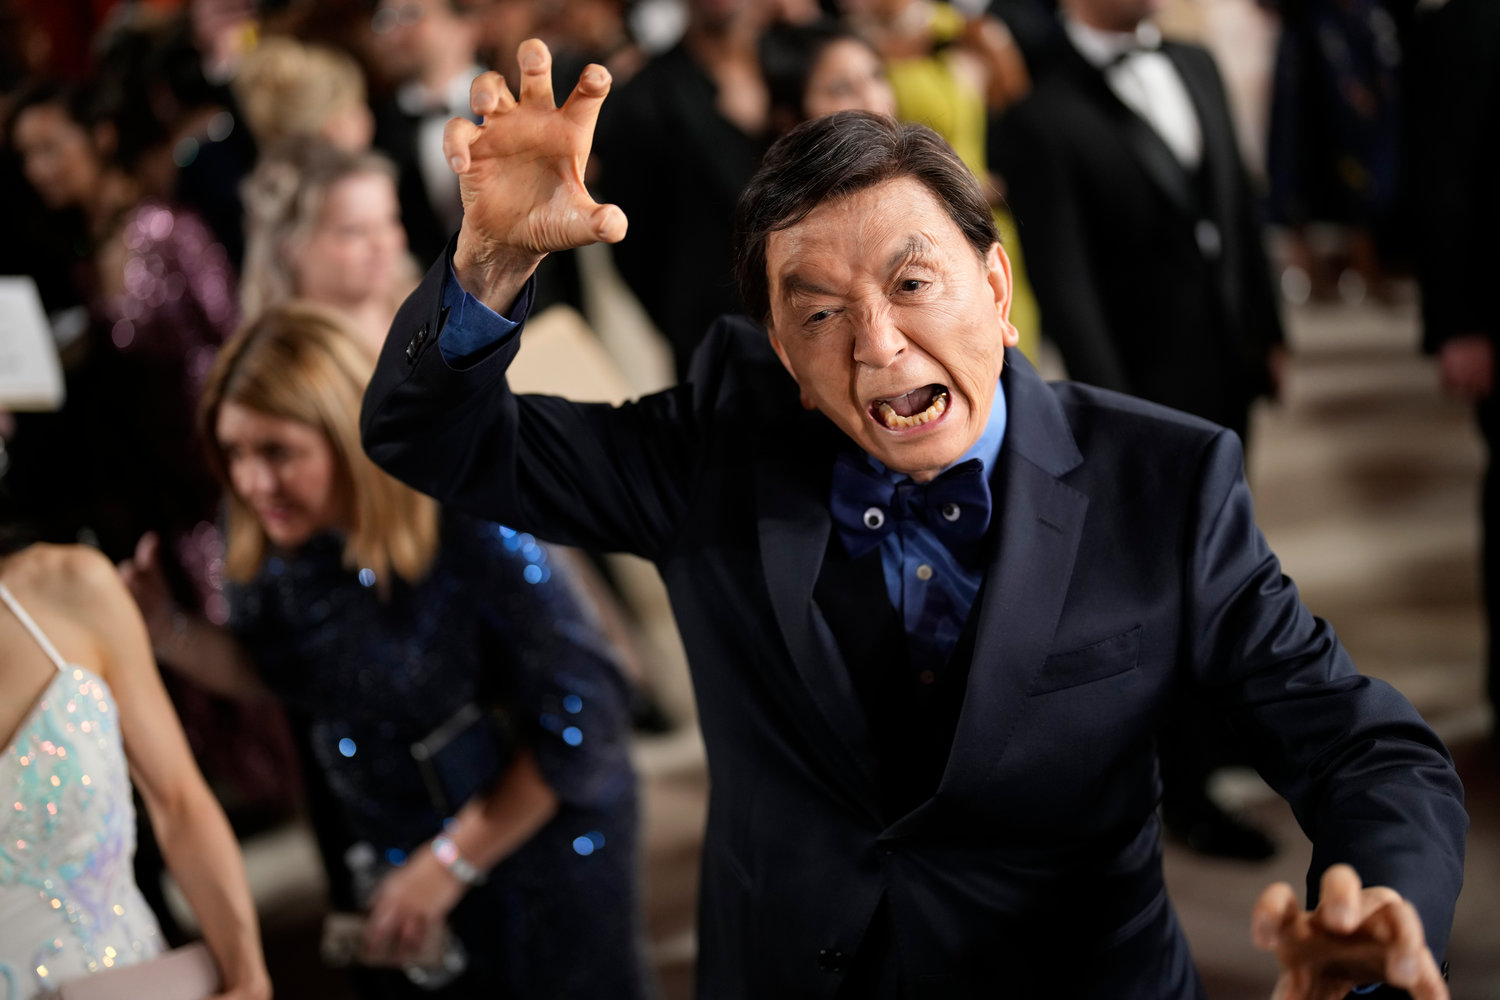 James Hong arrives at the Oscars on Sunday, March 12, 2023, at the Dolby Theatre in Los Angeles. (AP Photo/John Locher)